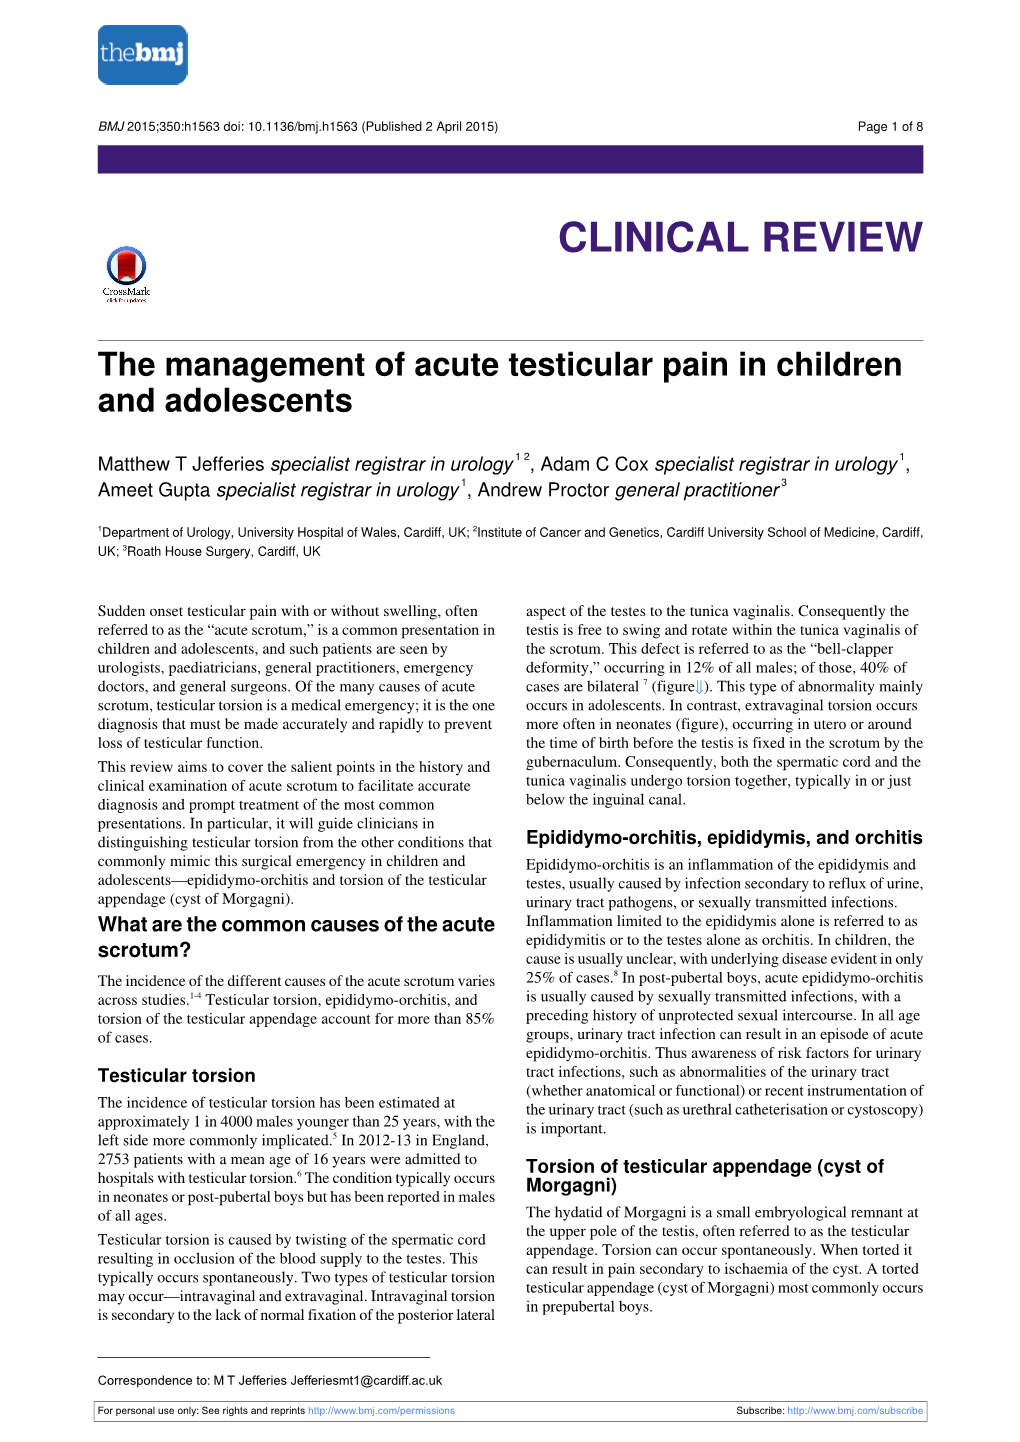 The Management of Acute Testicular Pain in Children and Adolescents